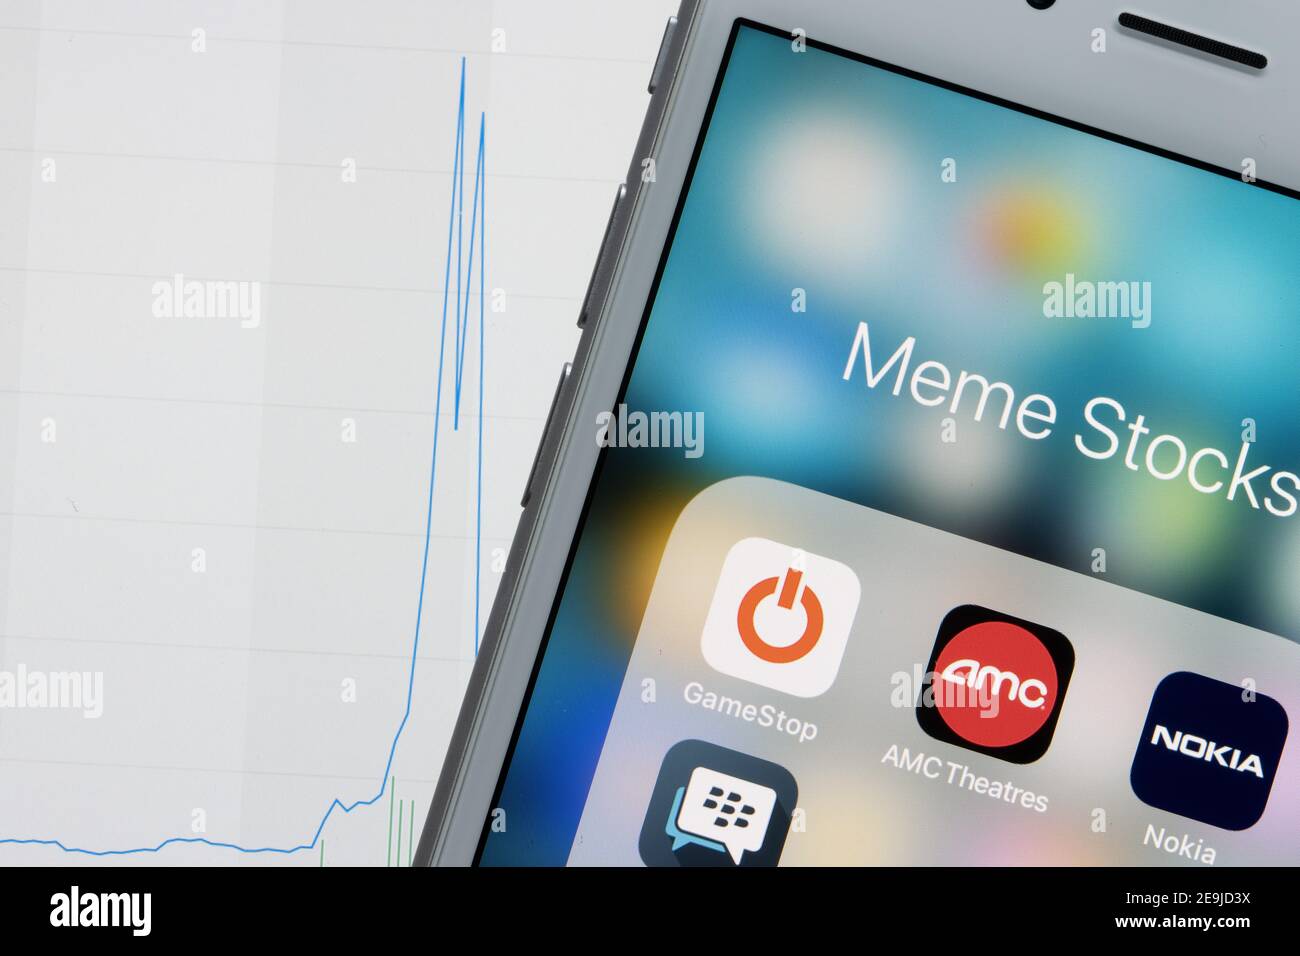 GameStop, AMC Theatres, Nokia, and BlackBerry Enterprise app icons are seen on an iPhone on February 4, 2021. Meme stock is a term for a stock that is Stock Photo